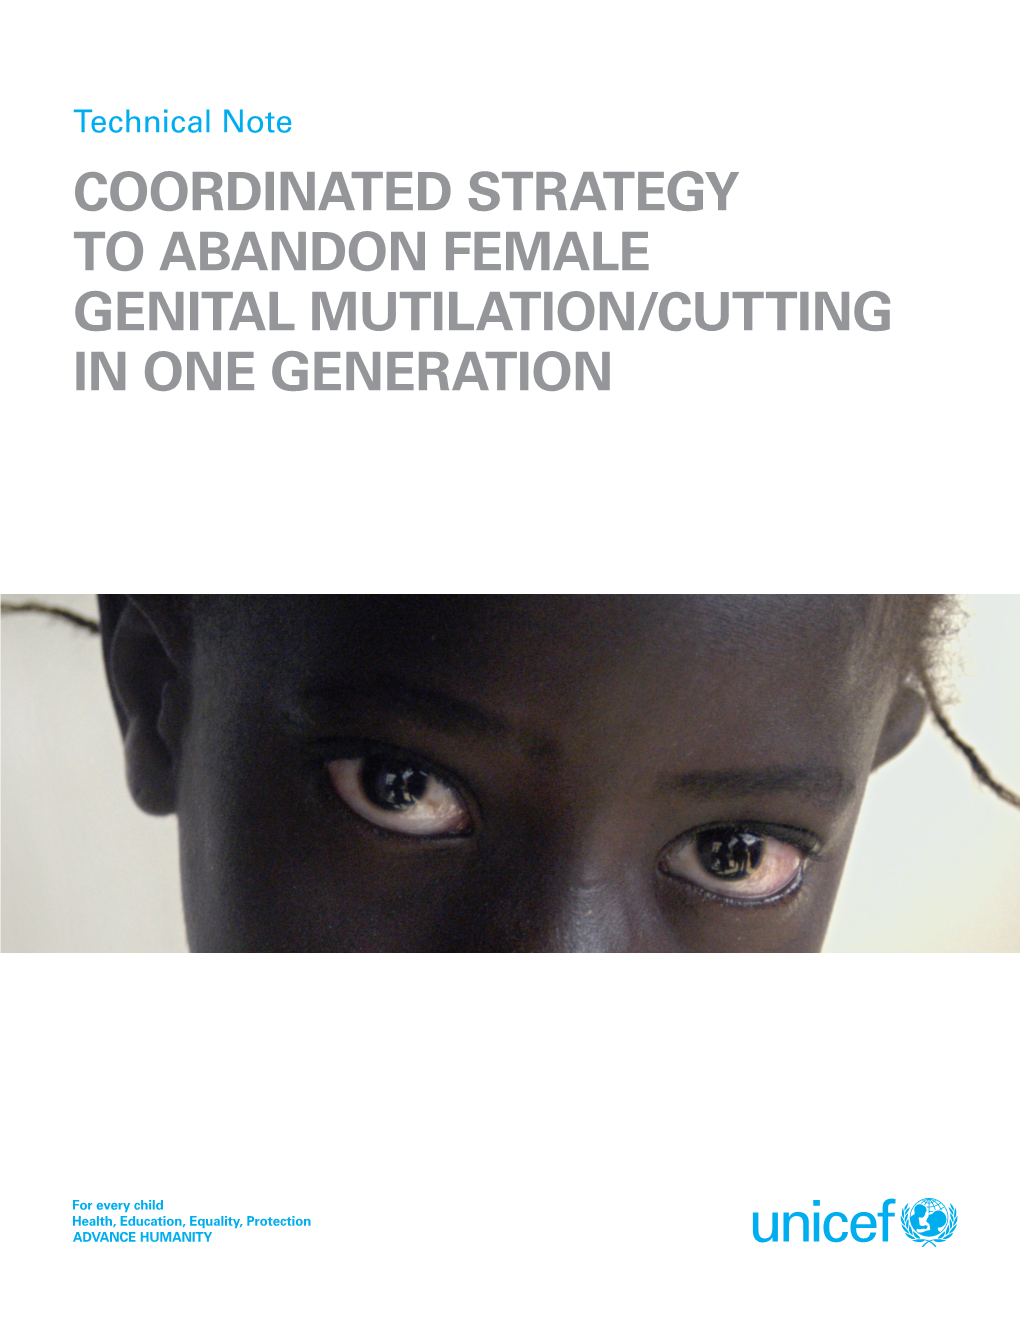 Coordinated Strategy to Abandon Female Genital Mutilation/Cutting in One Generation